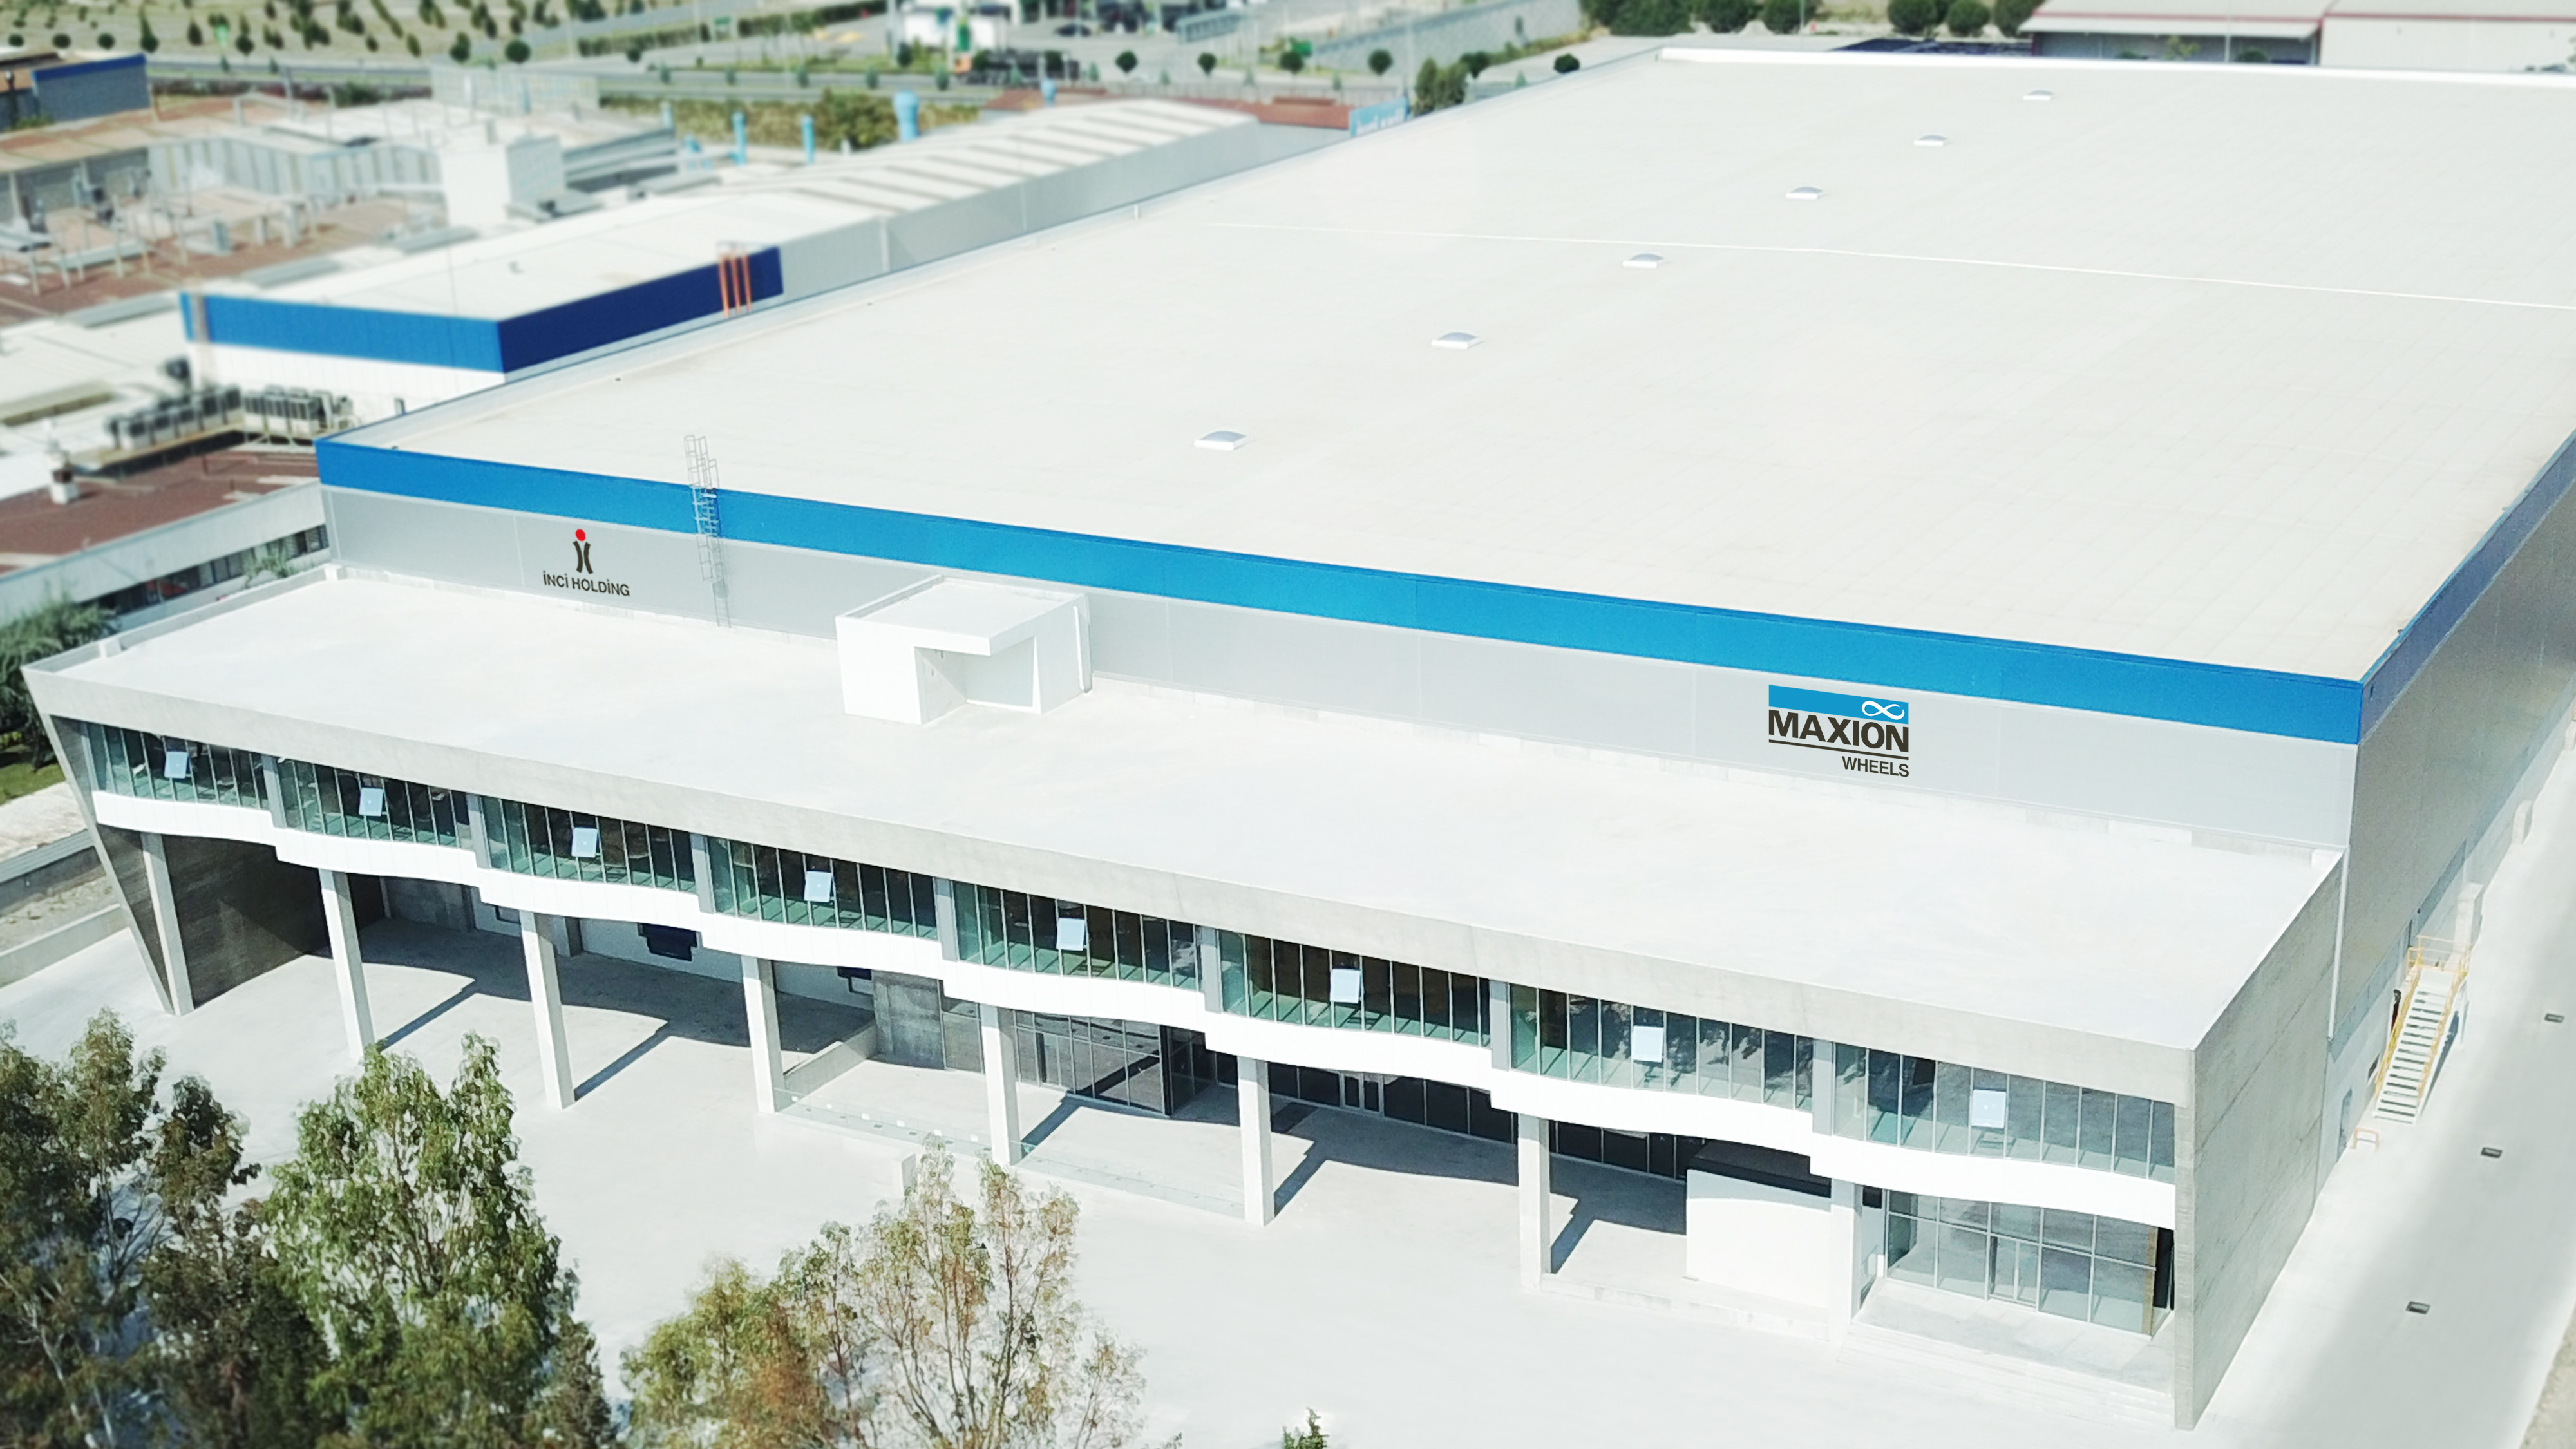 Maxion İnci Wheel Group makes an investment of 250 million TRY in a new plant in Manisa